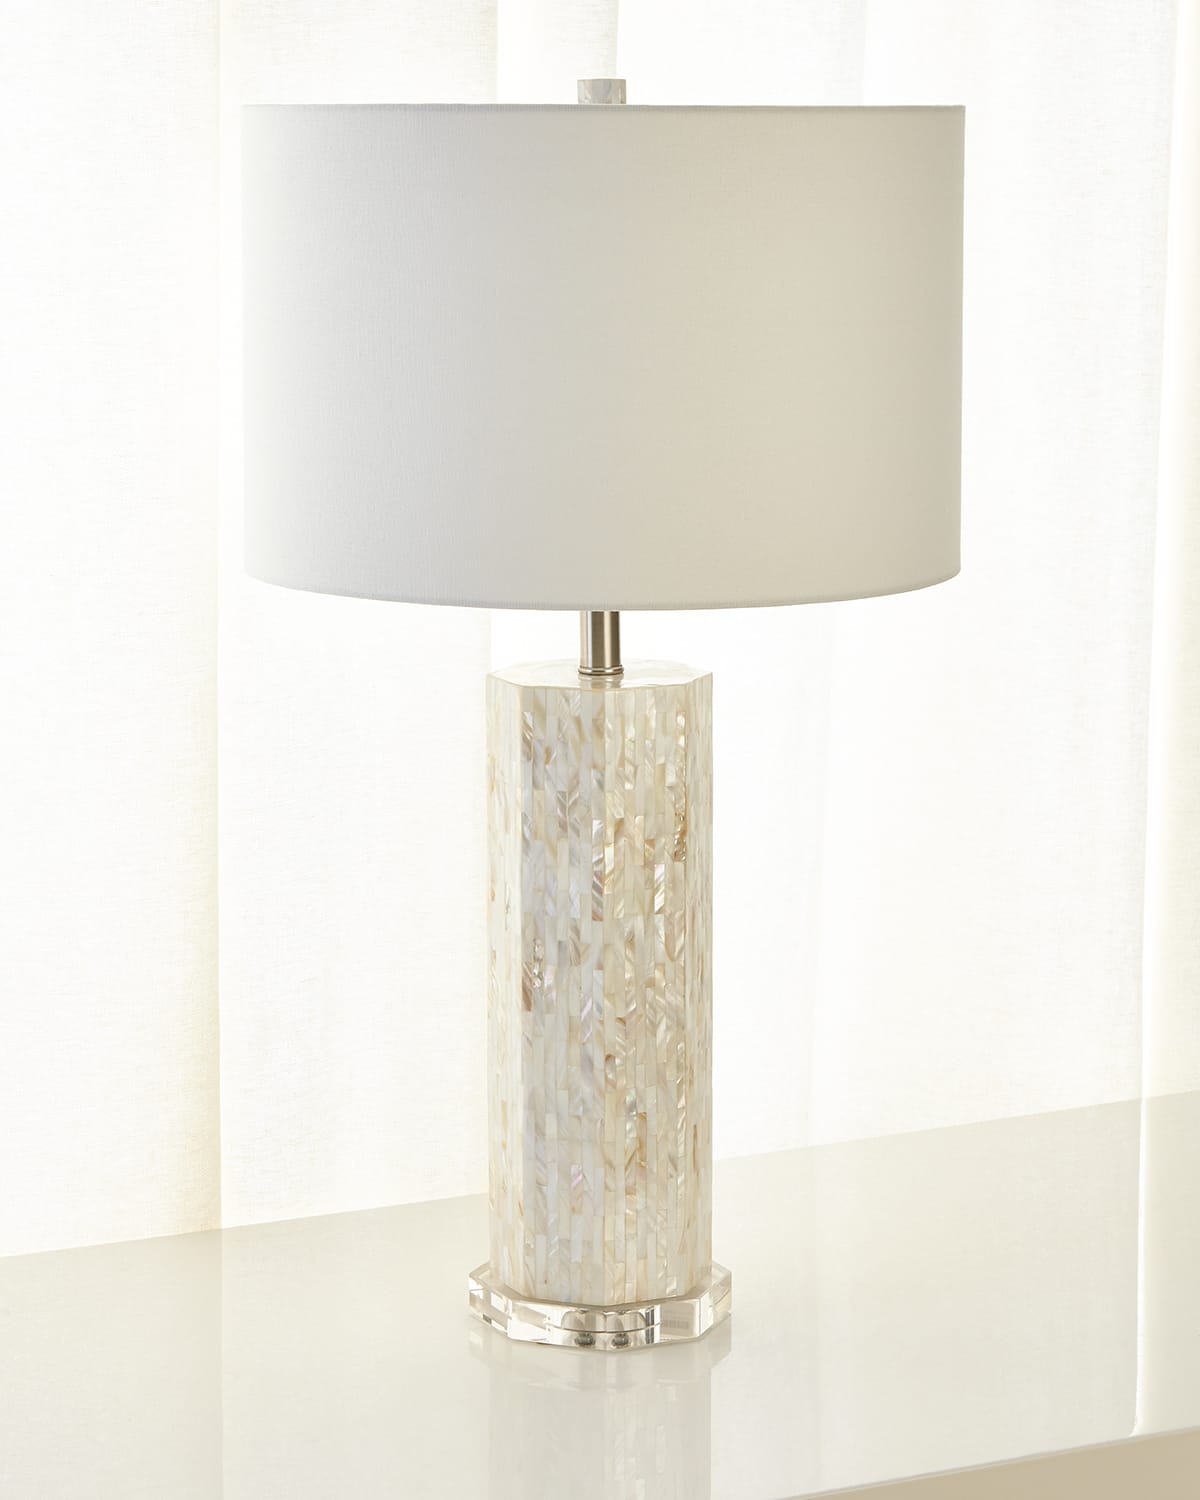 Octagonal Mother-of-Pearl Table Lamp